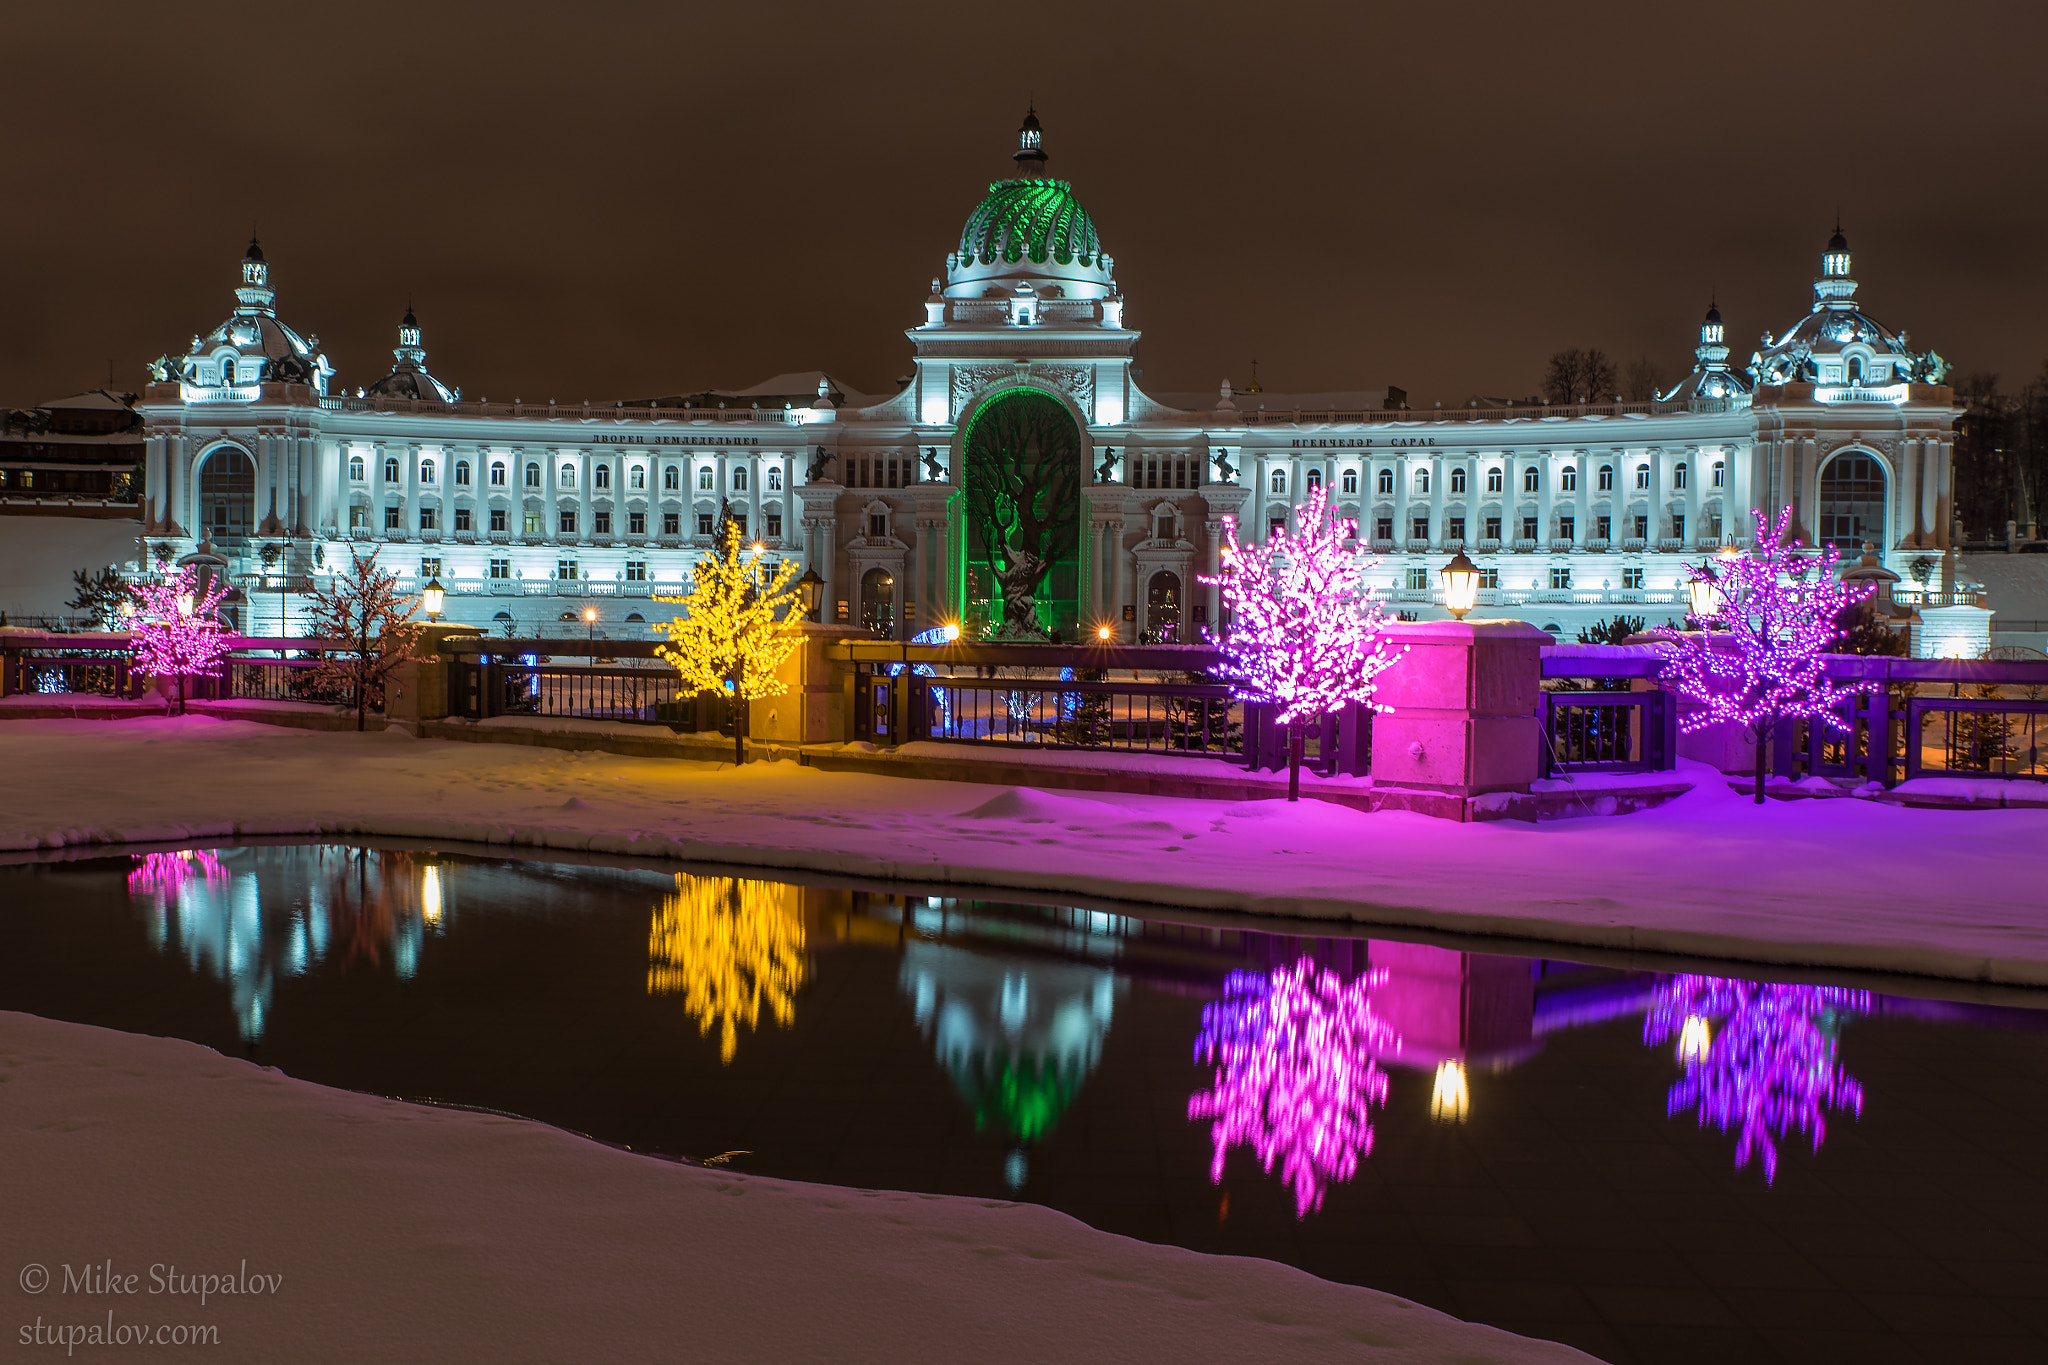 Tamron 24-70/2.8 SP VC USD sample photo. The fantastic palace of farmers in kazan photography